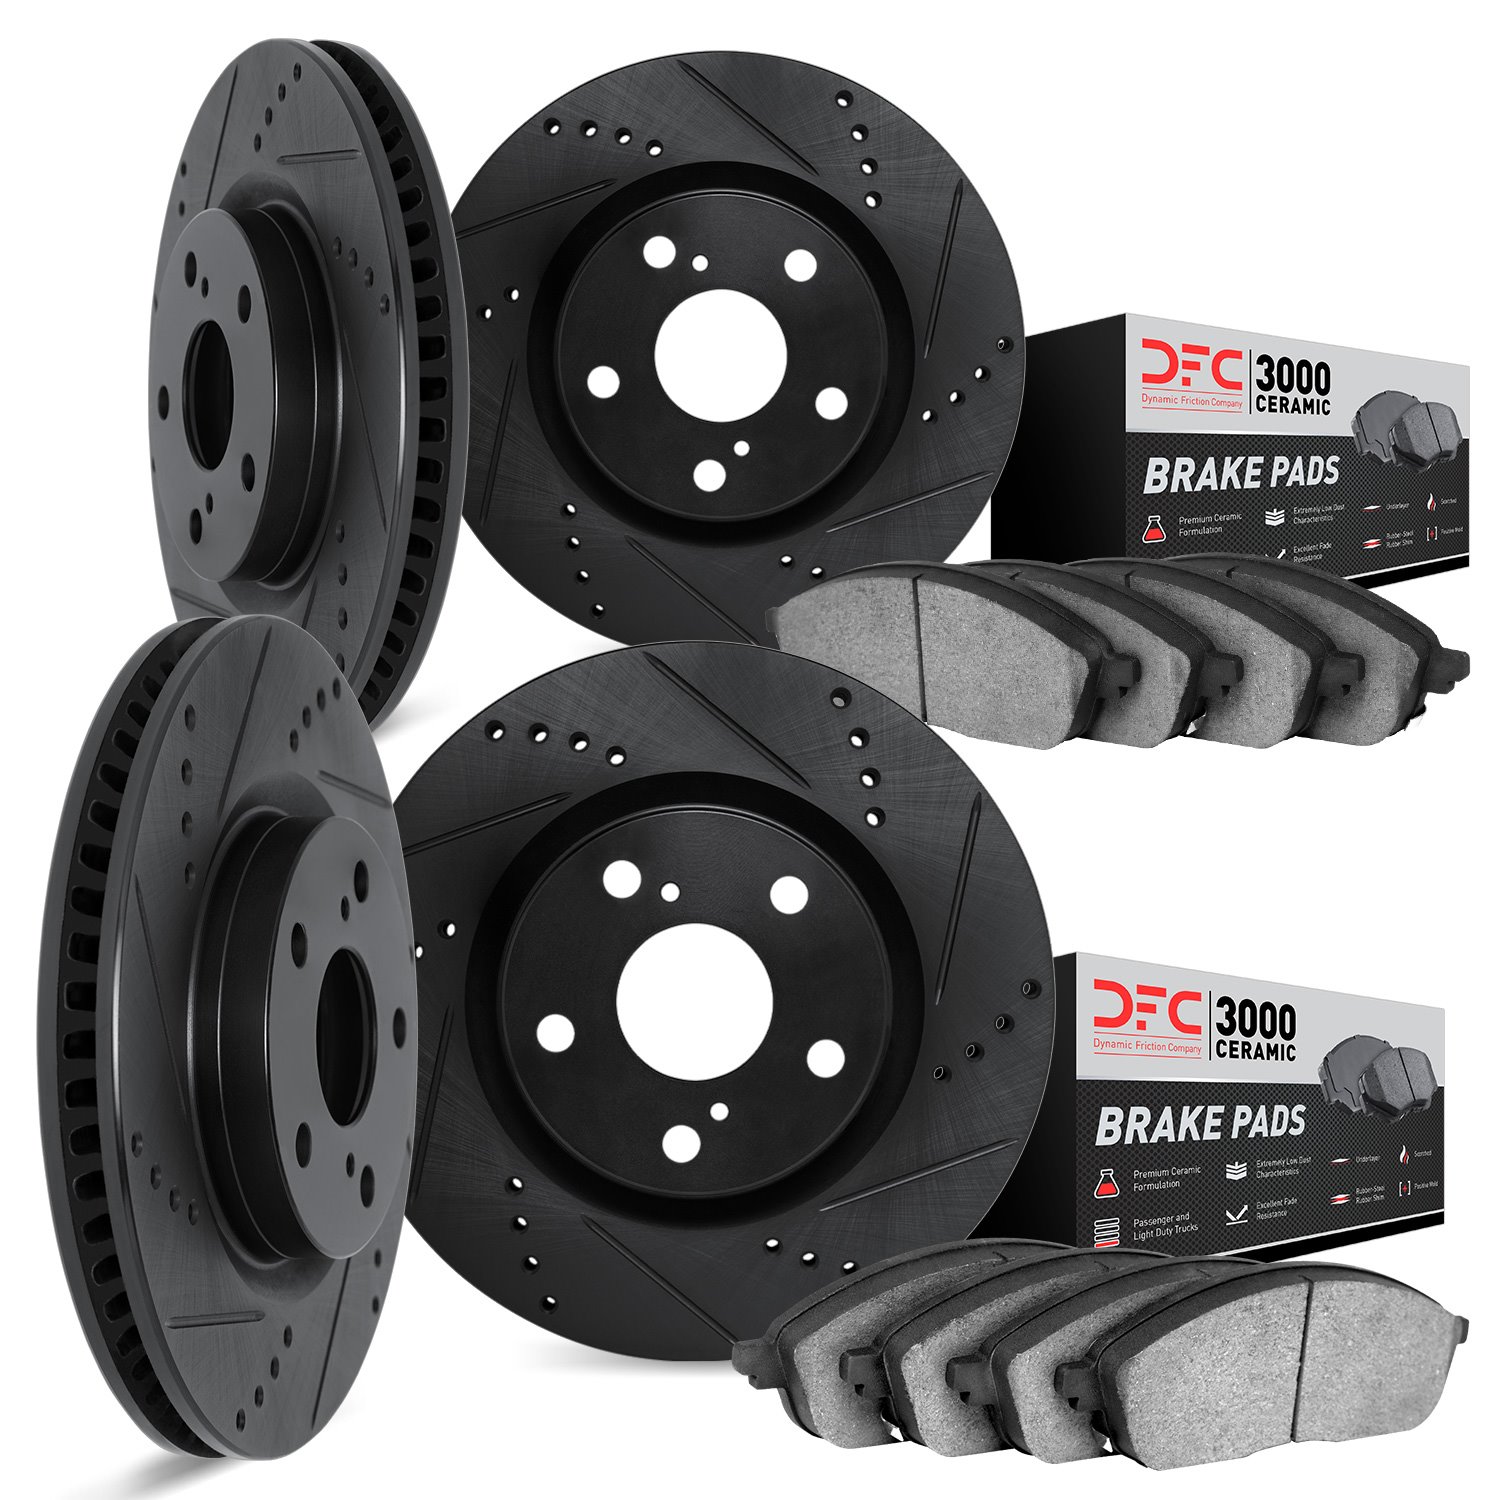 8304-31096 Drilled/Slotted Brake Rotors with 3000-Series Ceramic Brake Pads Kit [Black], Fits Select BMW, Position: Front and Re